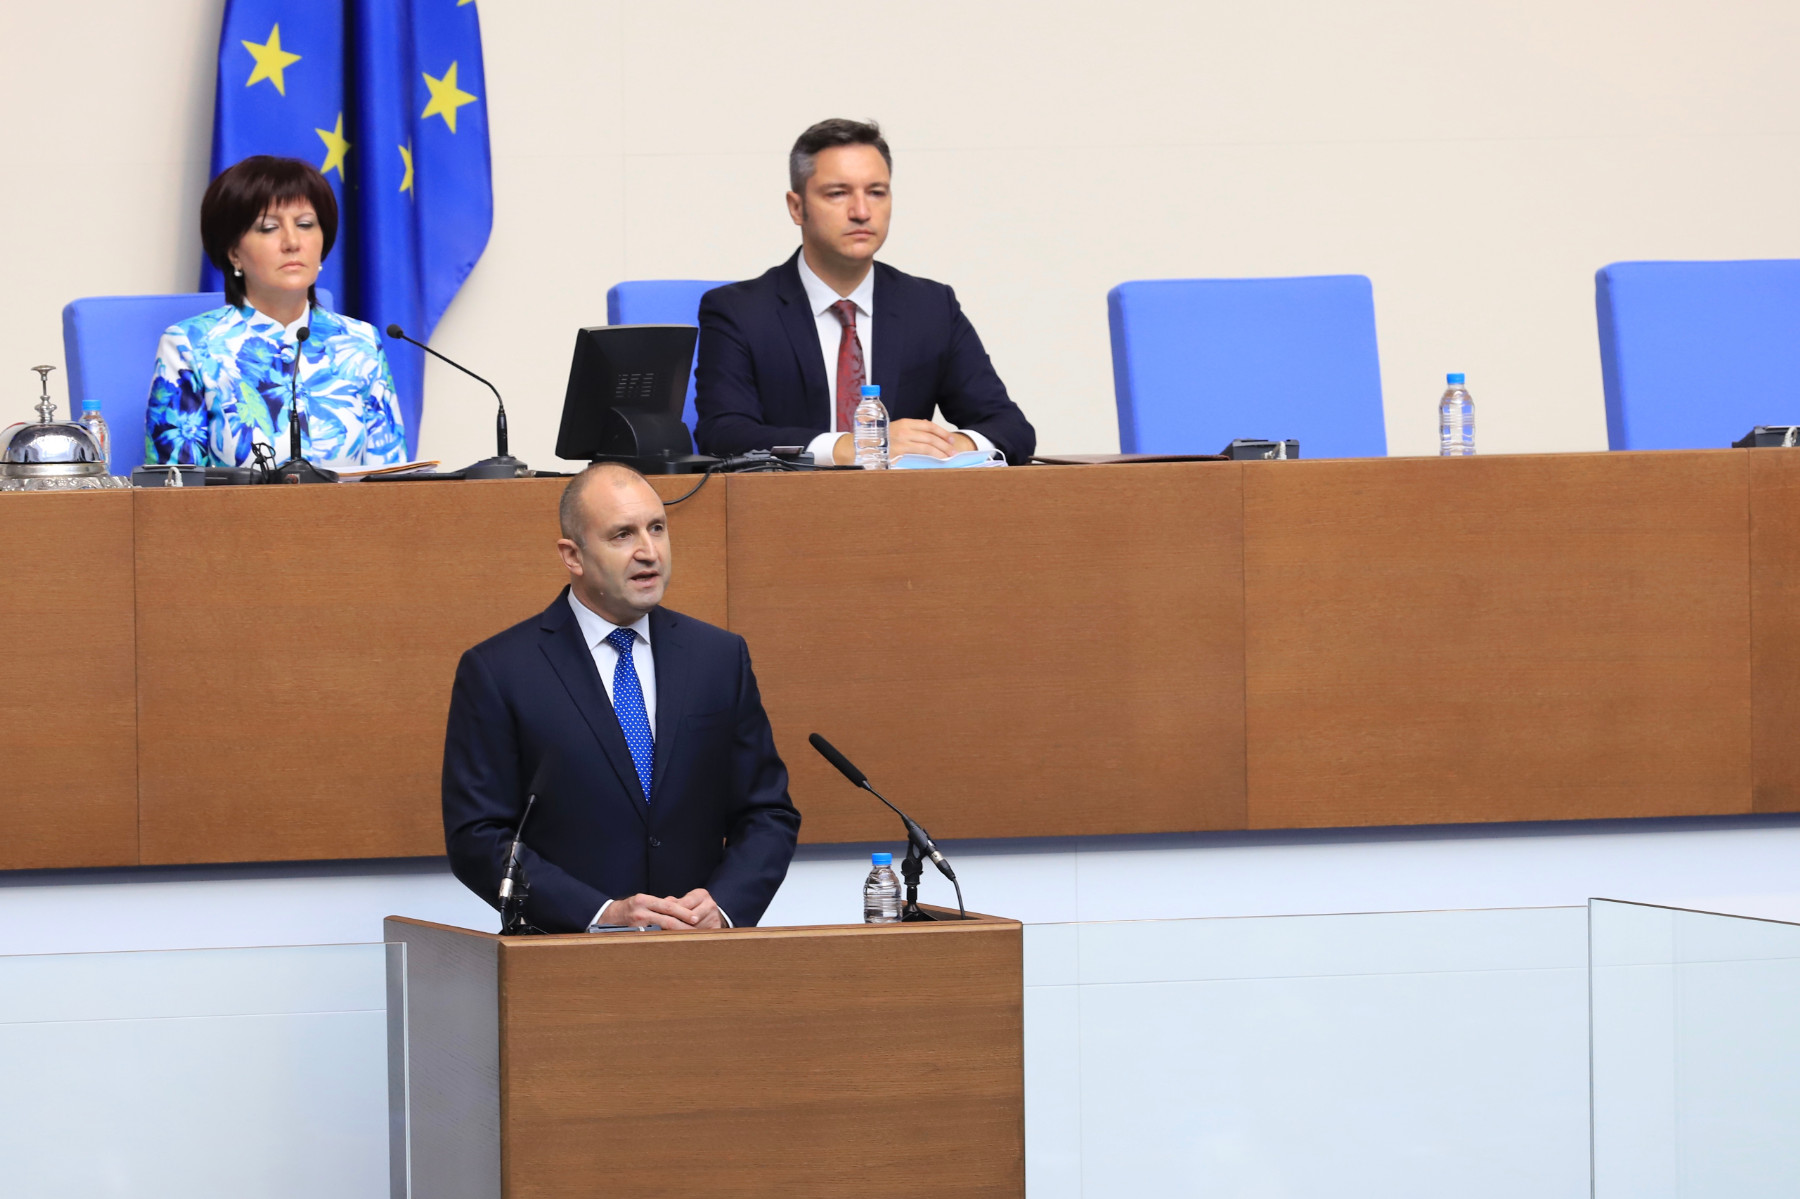 Rumen Radev: I hope that the ongoing changes for the better are irreversible